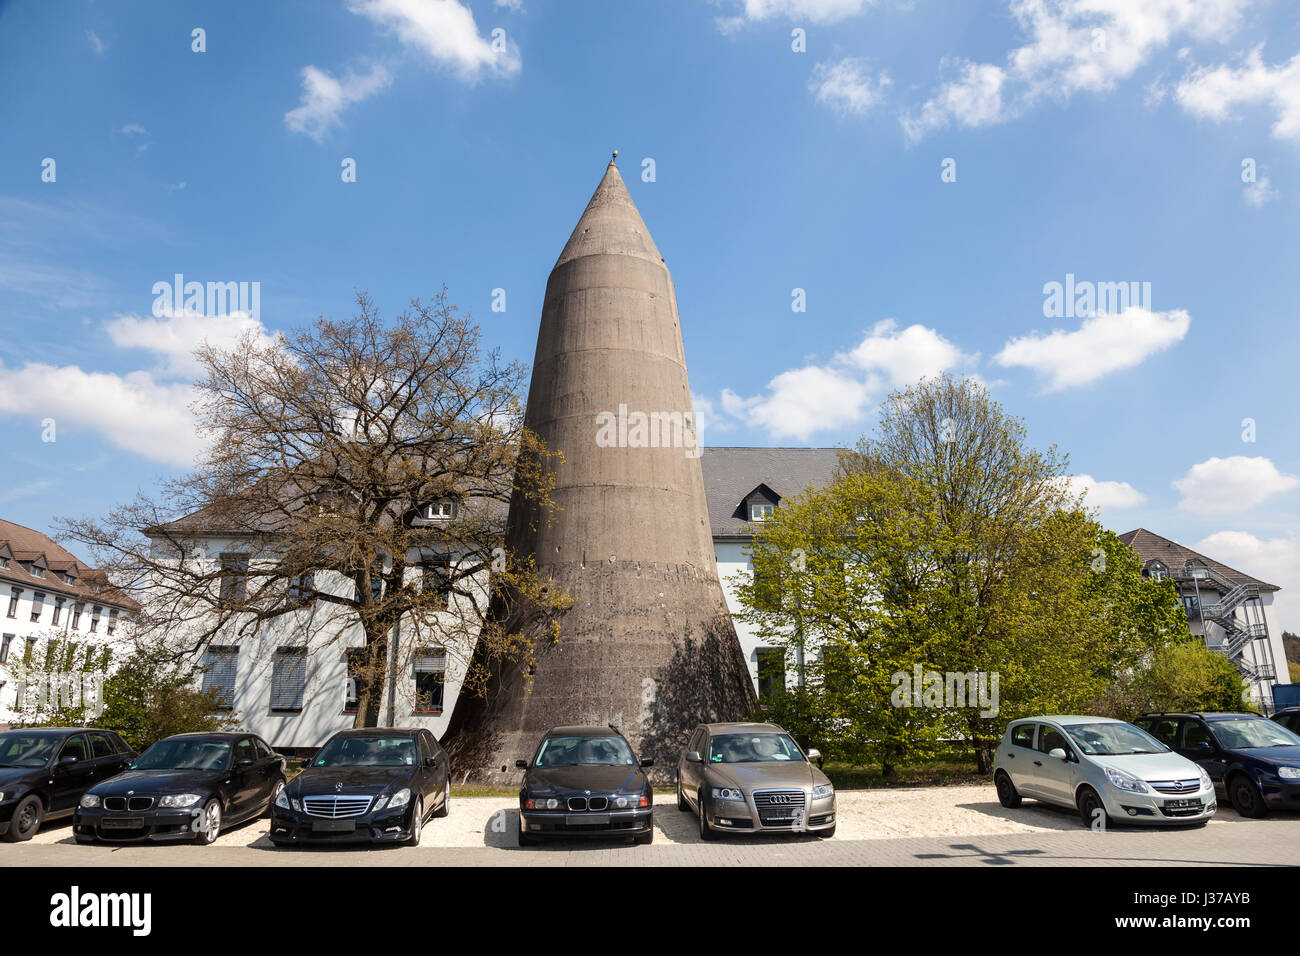 Giessen, Germany - March 30, 2017: World War II vertical bomb shelter in the city of Giessen, Germany Stock Photo